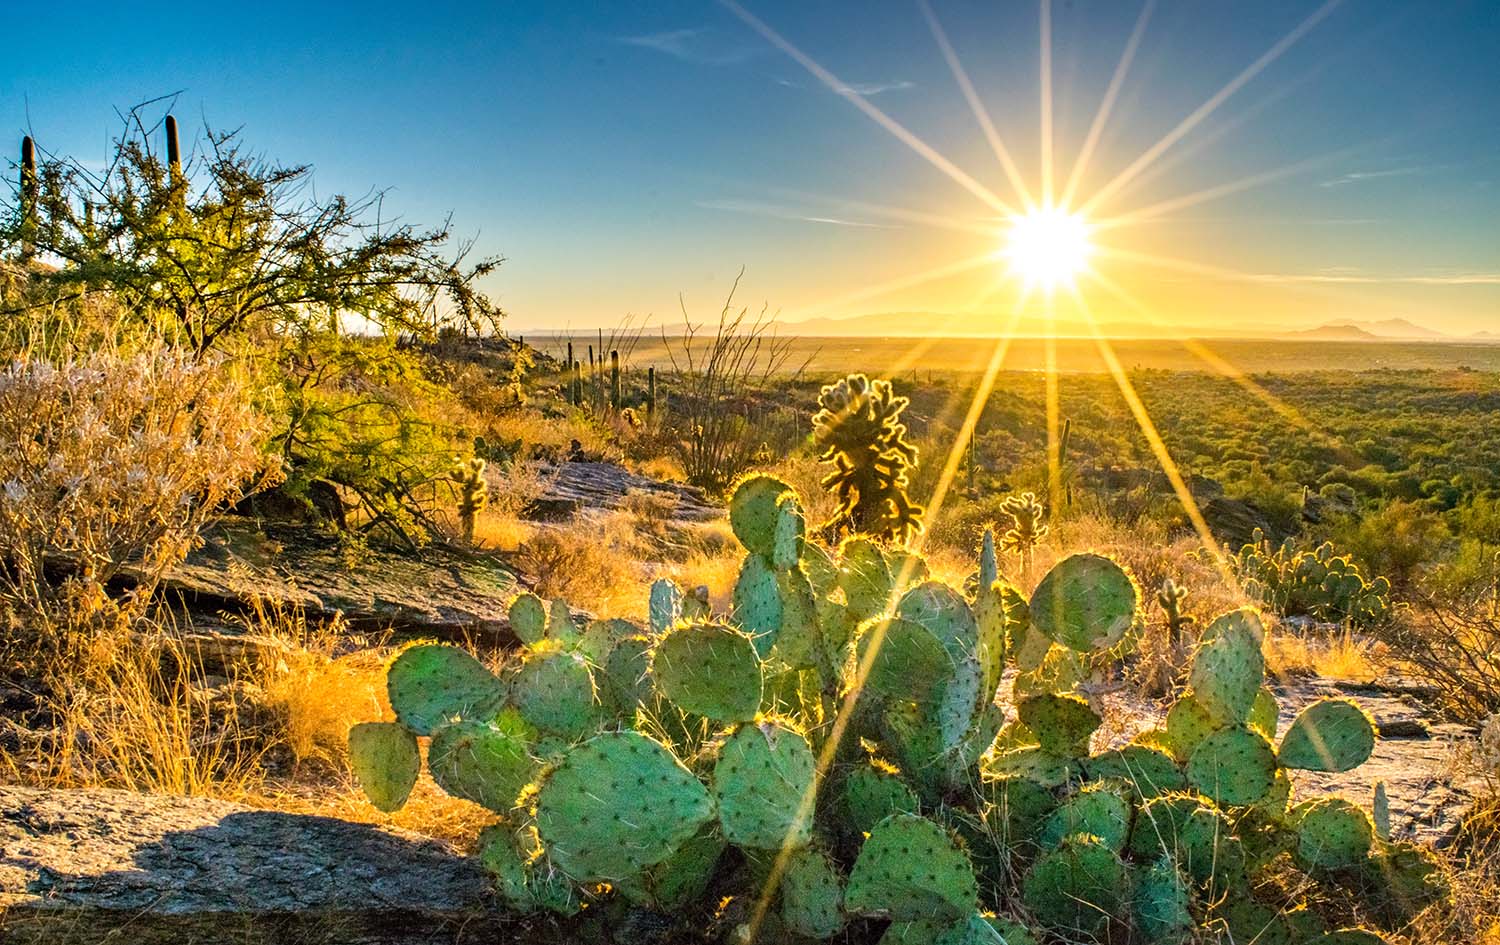 Wide shot of a small cactus on rocky dry hillside in the Sonoran Desert at sunset